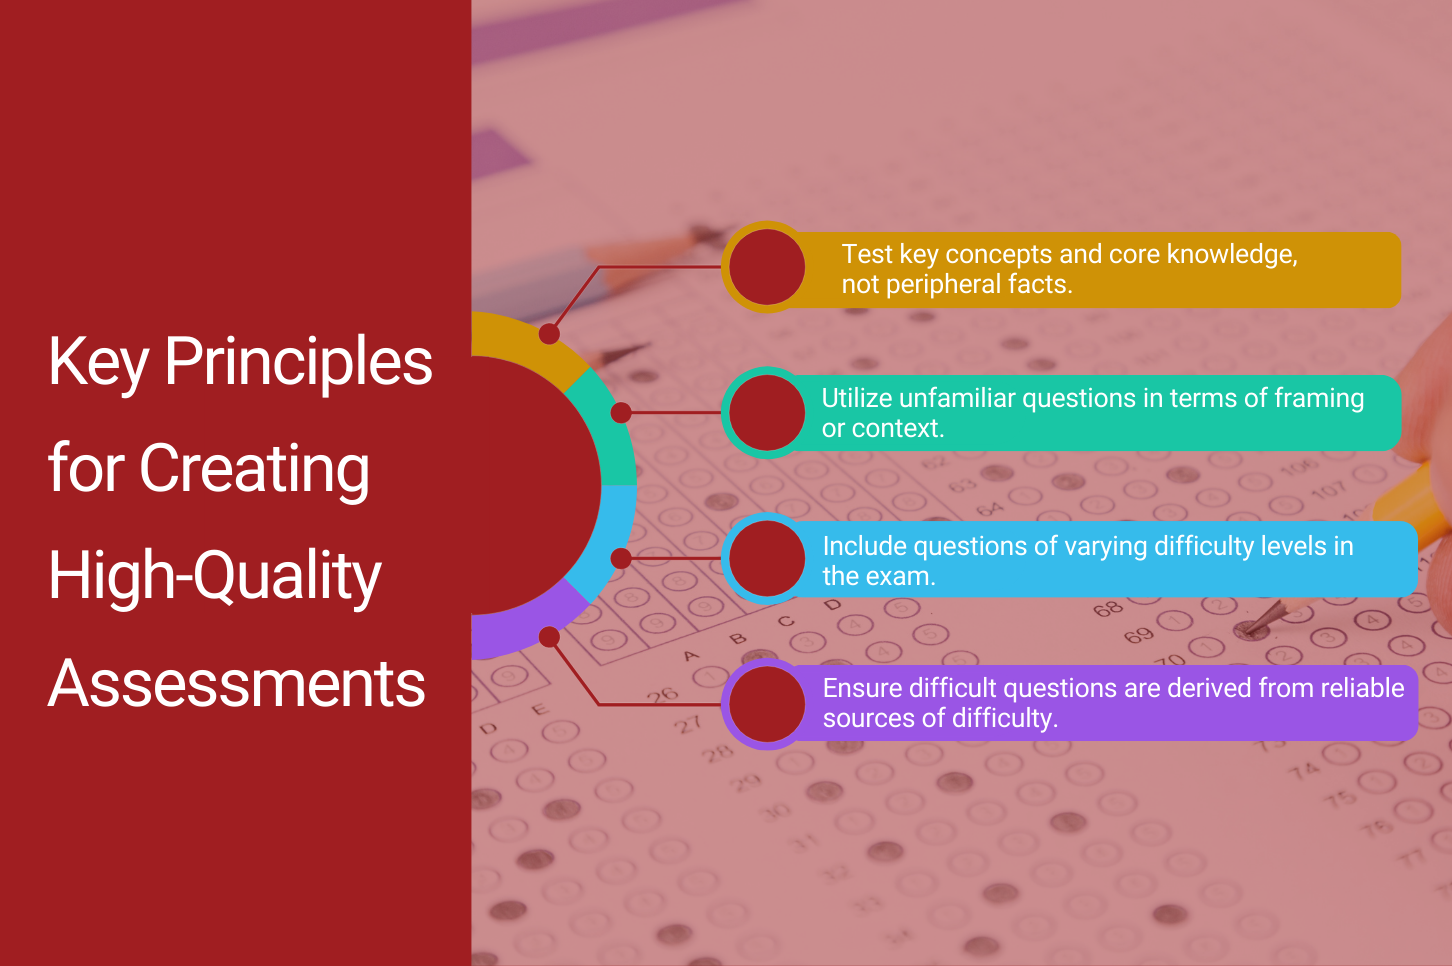 Key Principles for Creating High-Quality Assessments